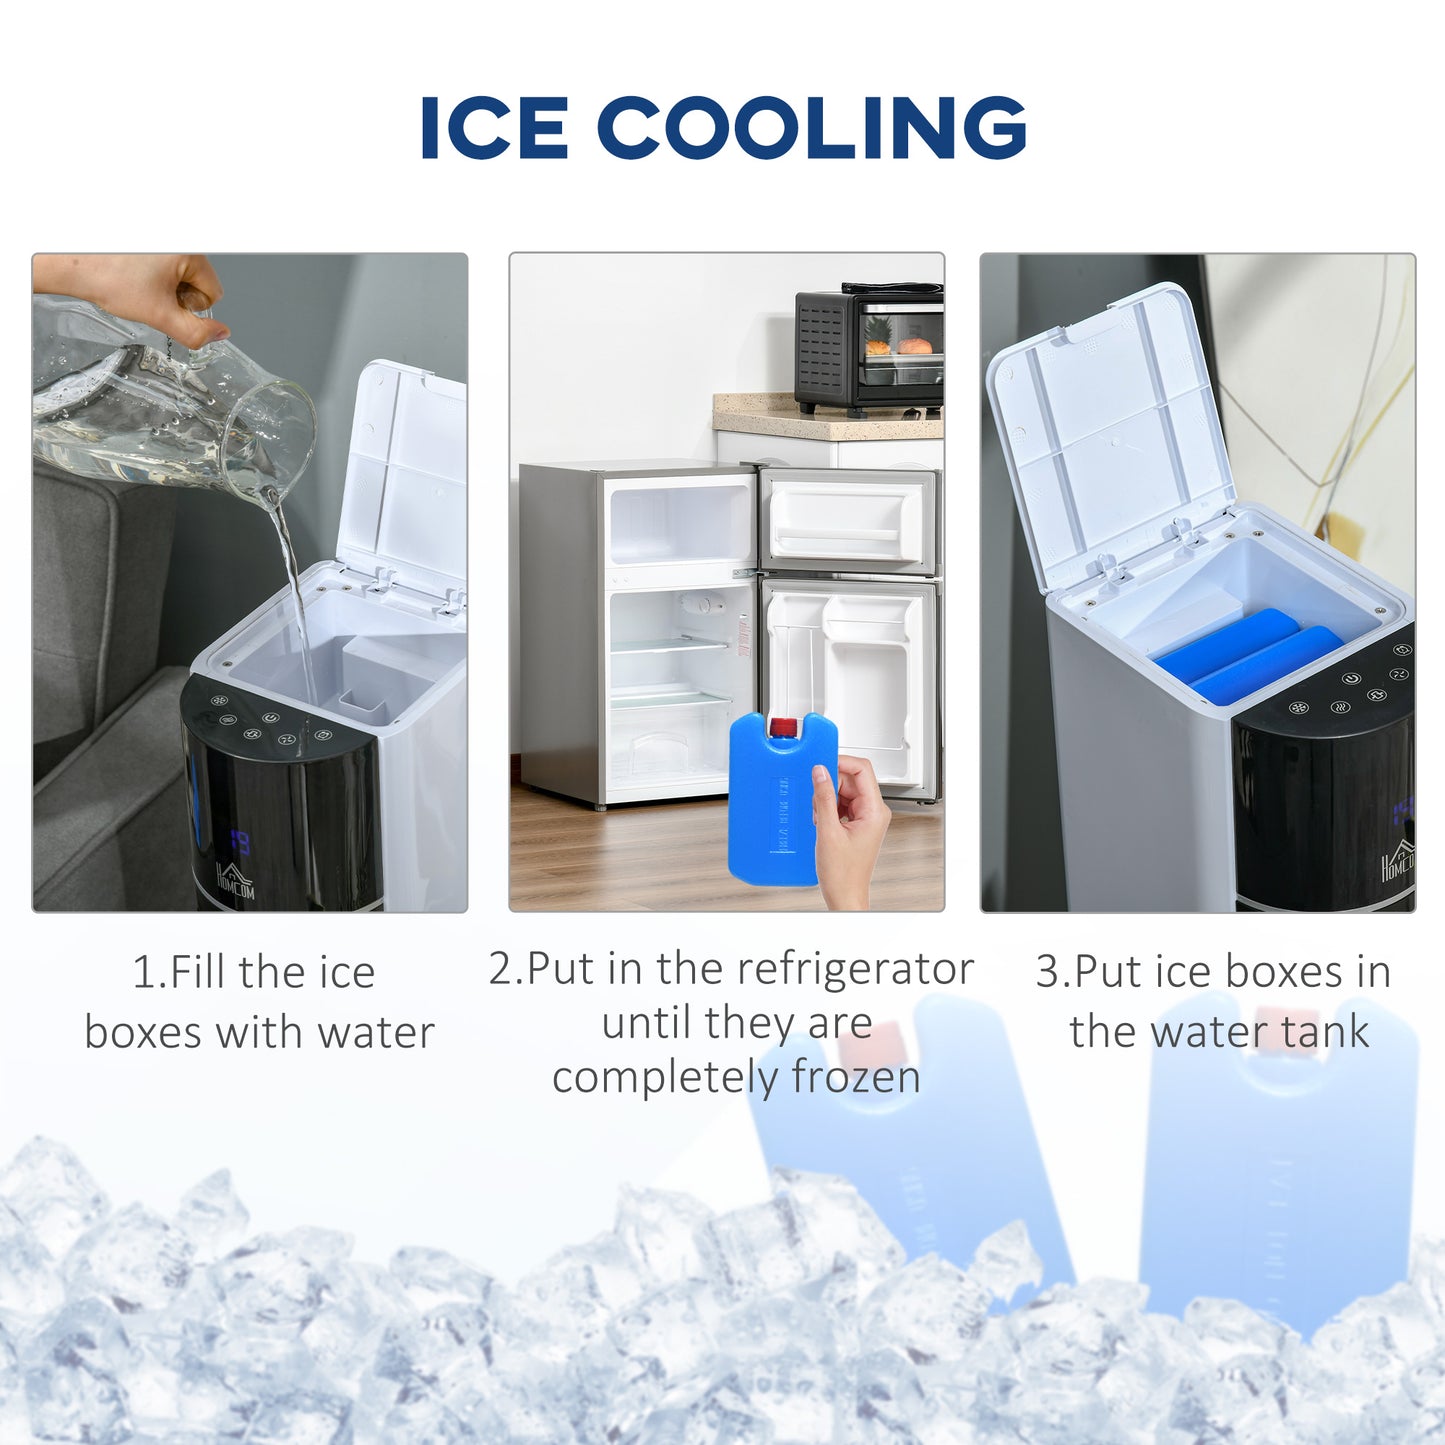 HOMCOM 41" Bladeless Air Cooler, Evaporative Ice Cooling Tower Fan Water Conditioner Humidifier Unit w/ 3 Modes, Remote Controller, Timer